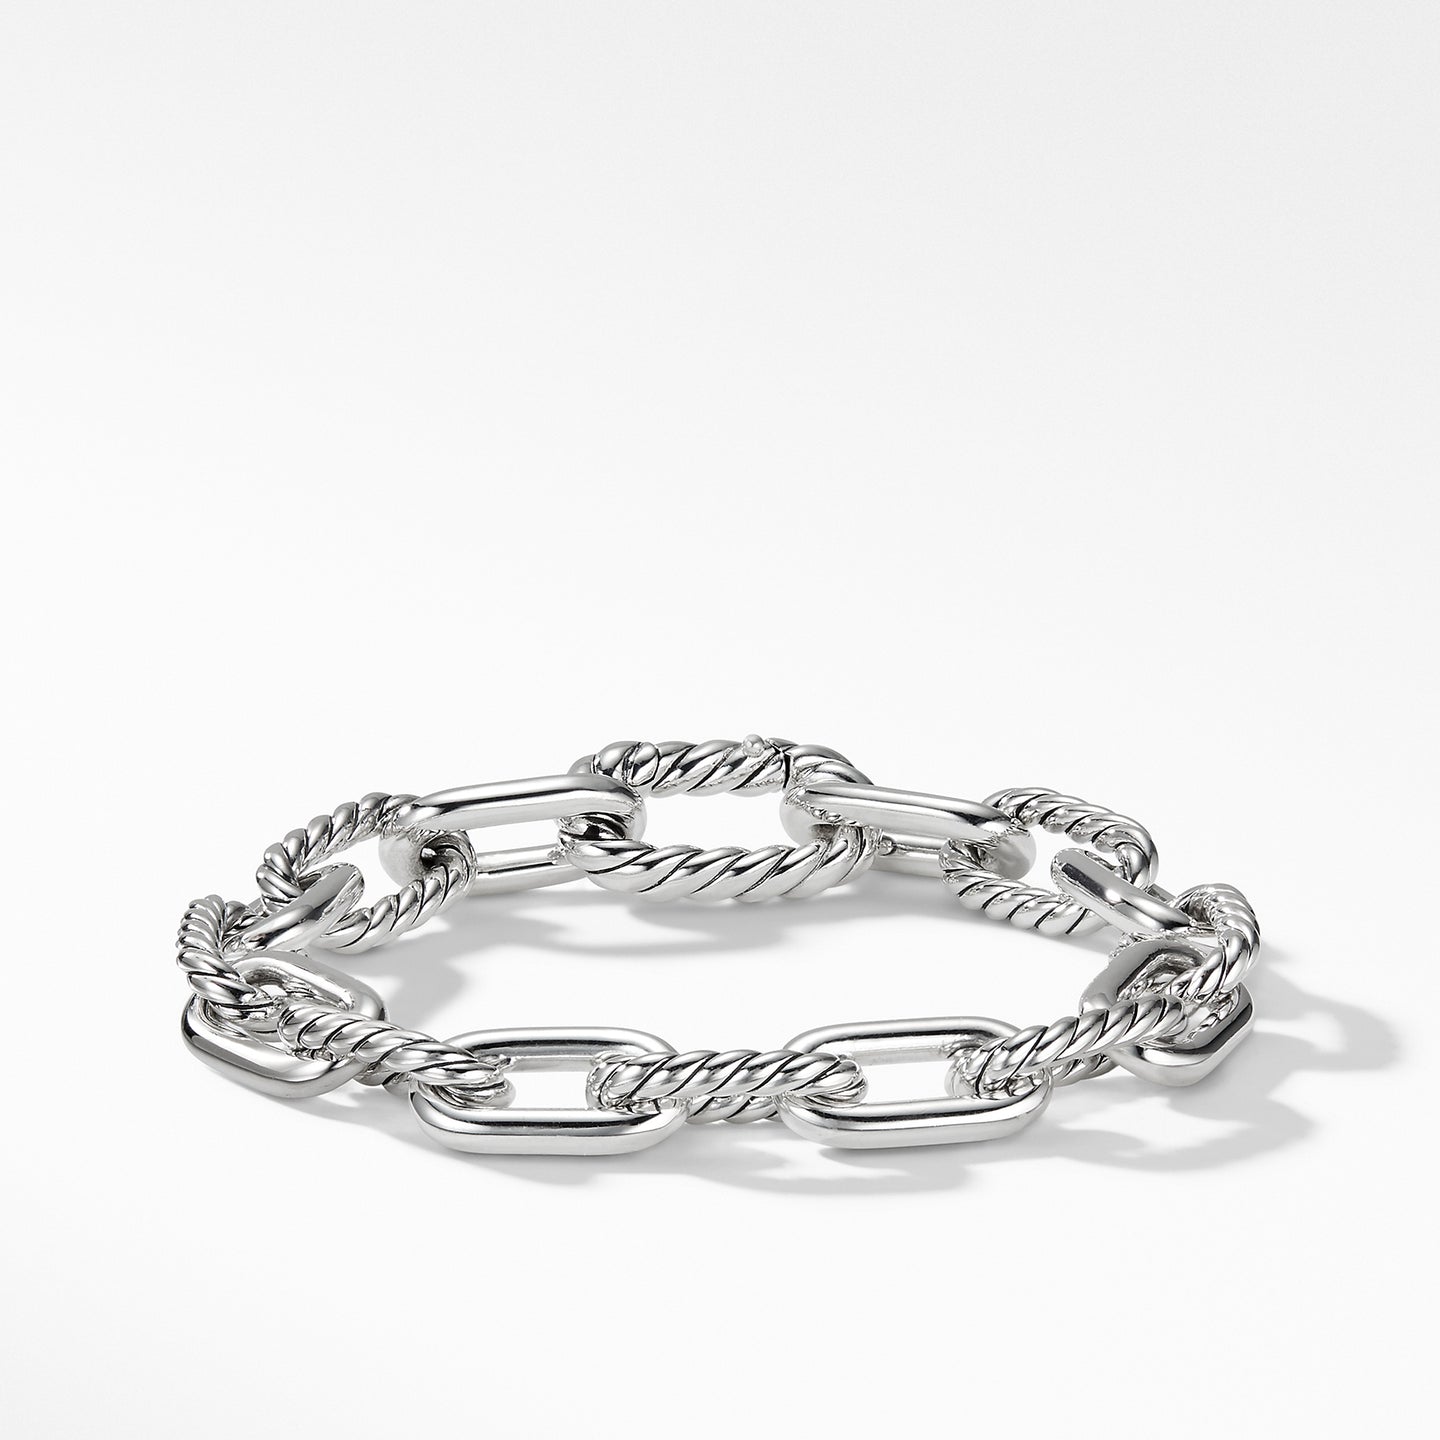 David Yurman The Throroughbred® Collection  Bracelet in Sterling Silver